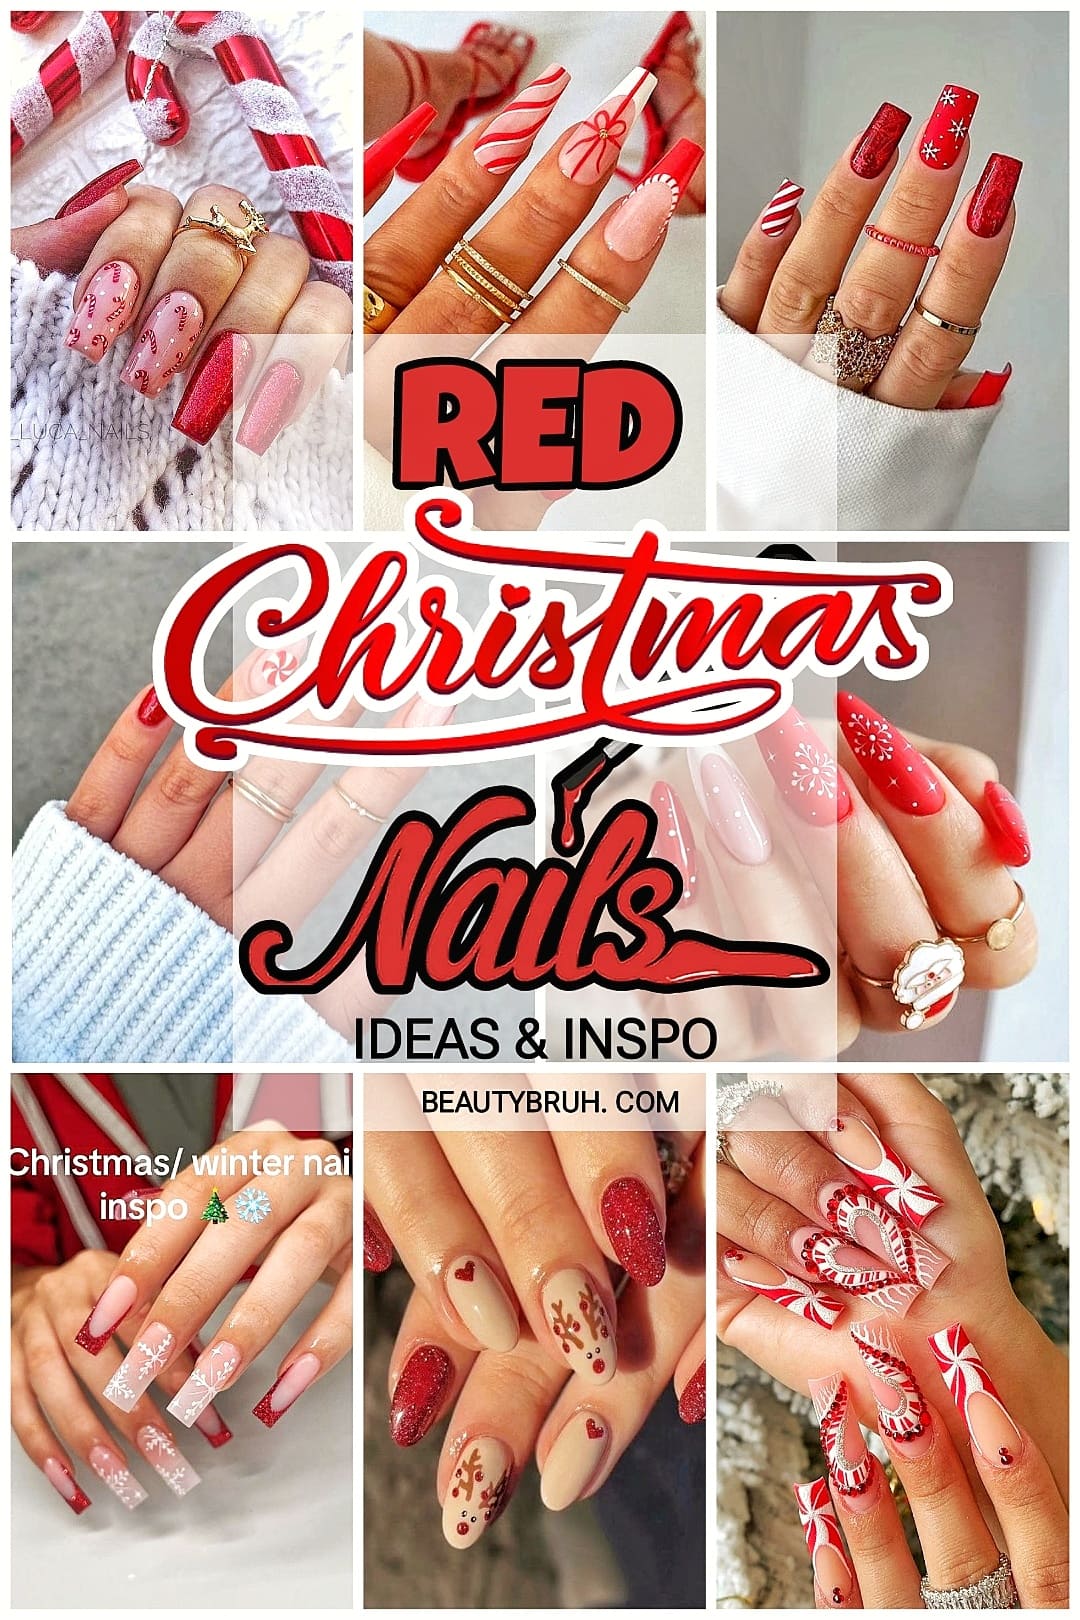 Red Christmas Nails Inspo